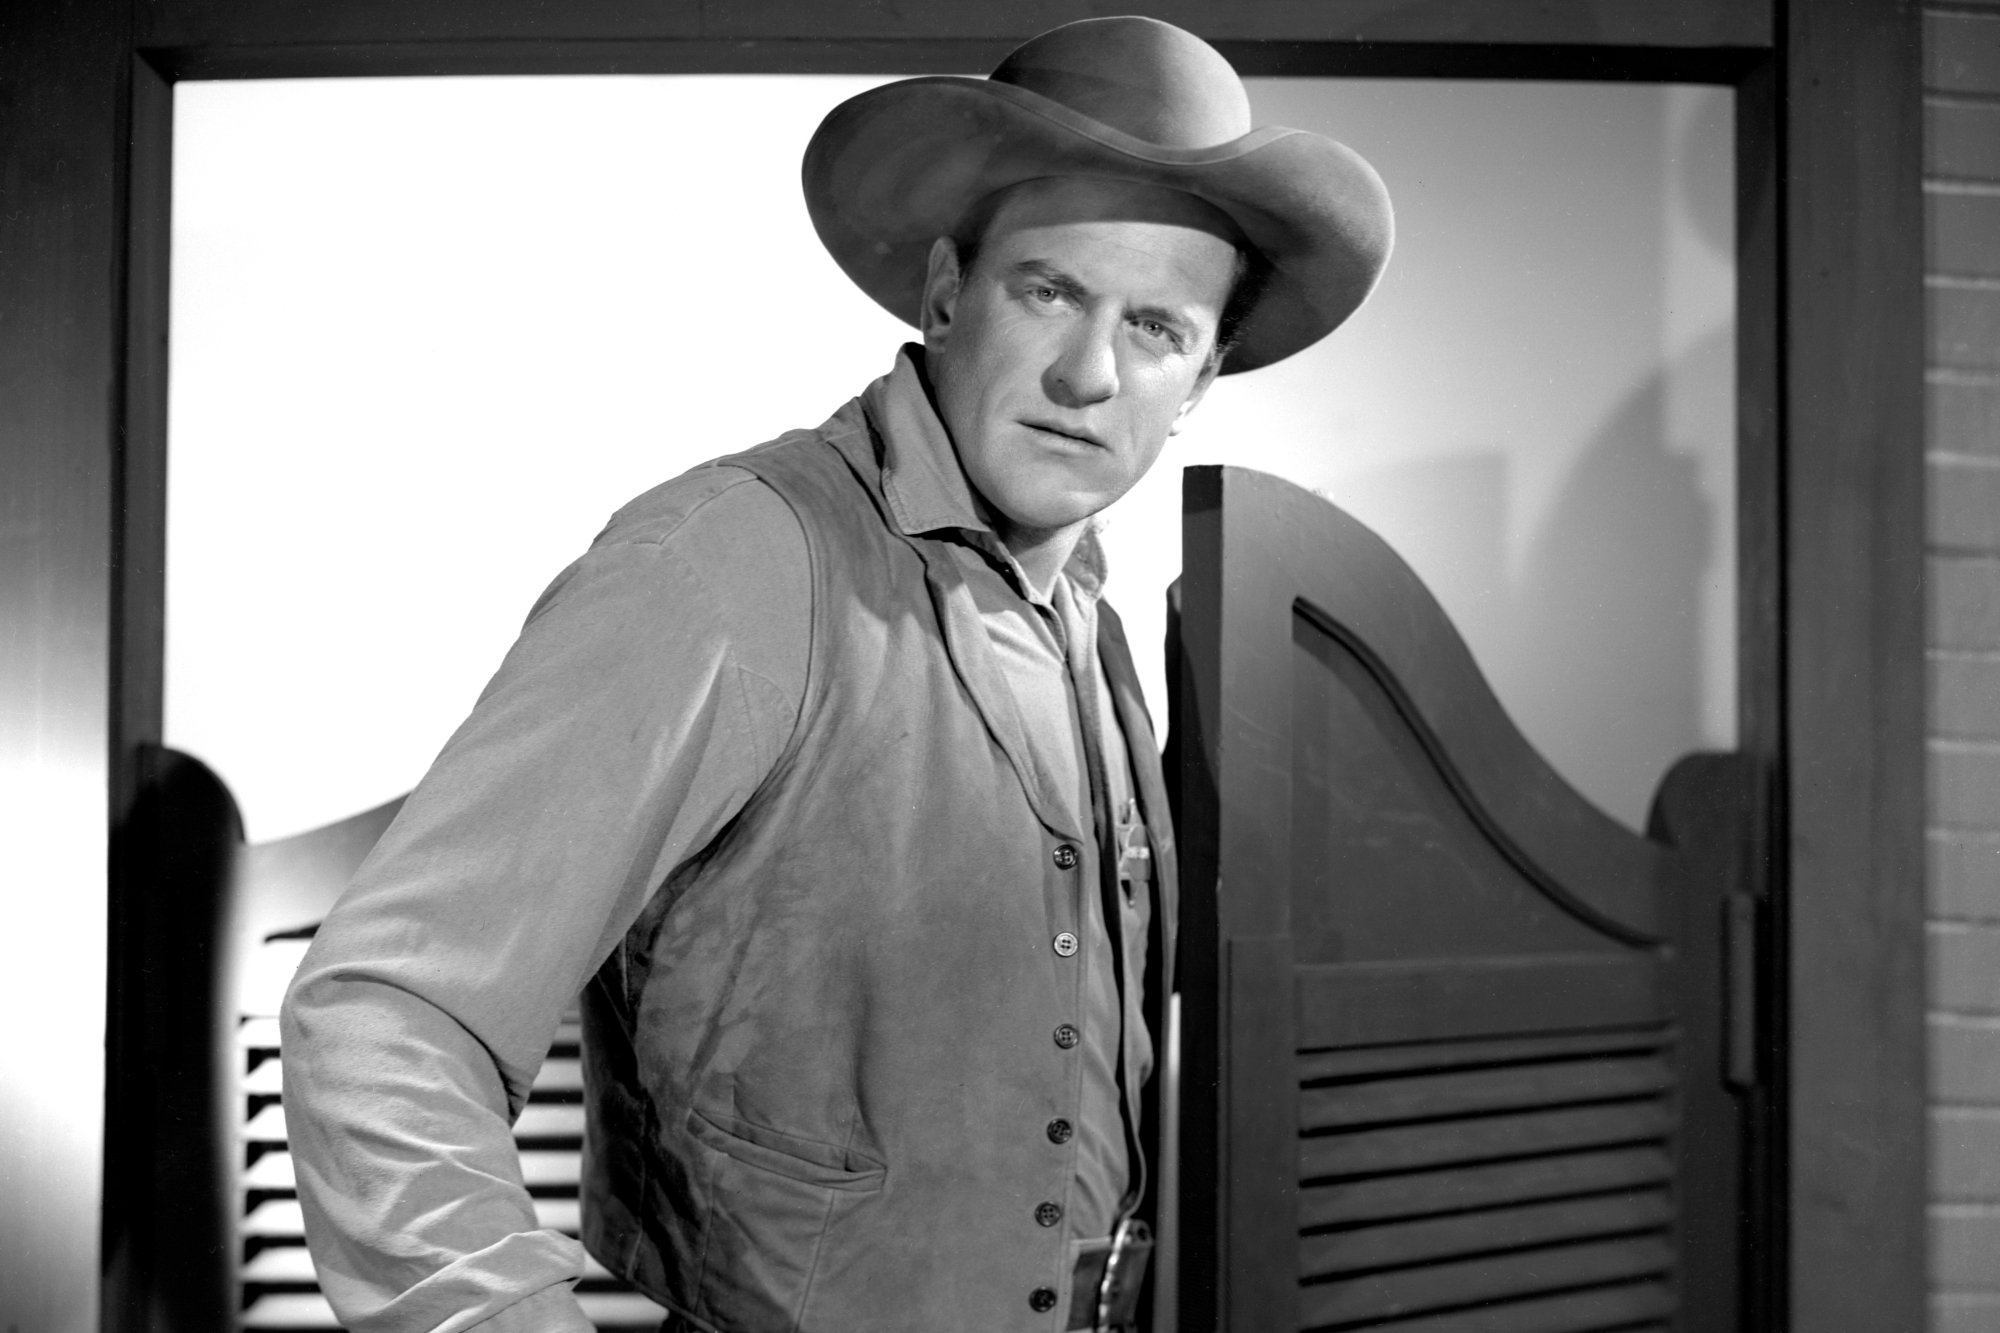 'Gunsmoke' James Arness as U.S. Marshal Matt Dillon in a black-and-white picture wearing a Western uniform in front of swinging doors